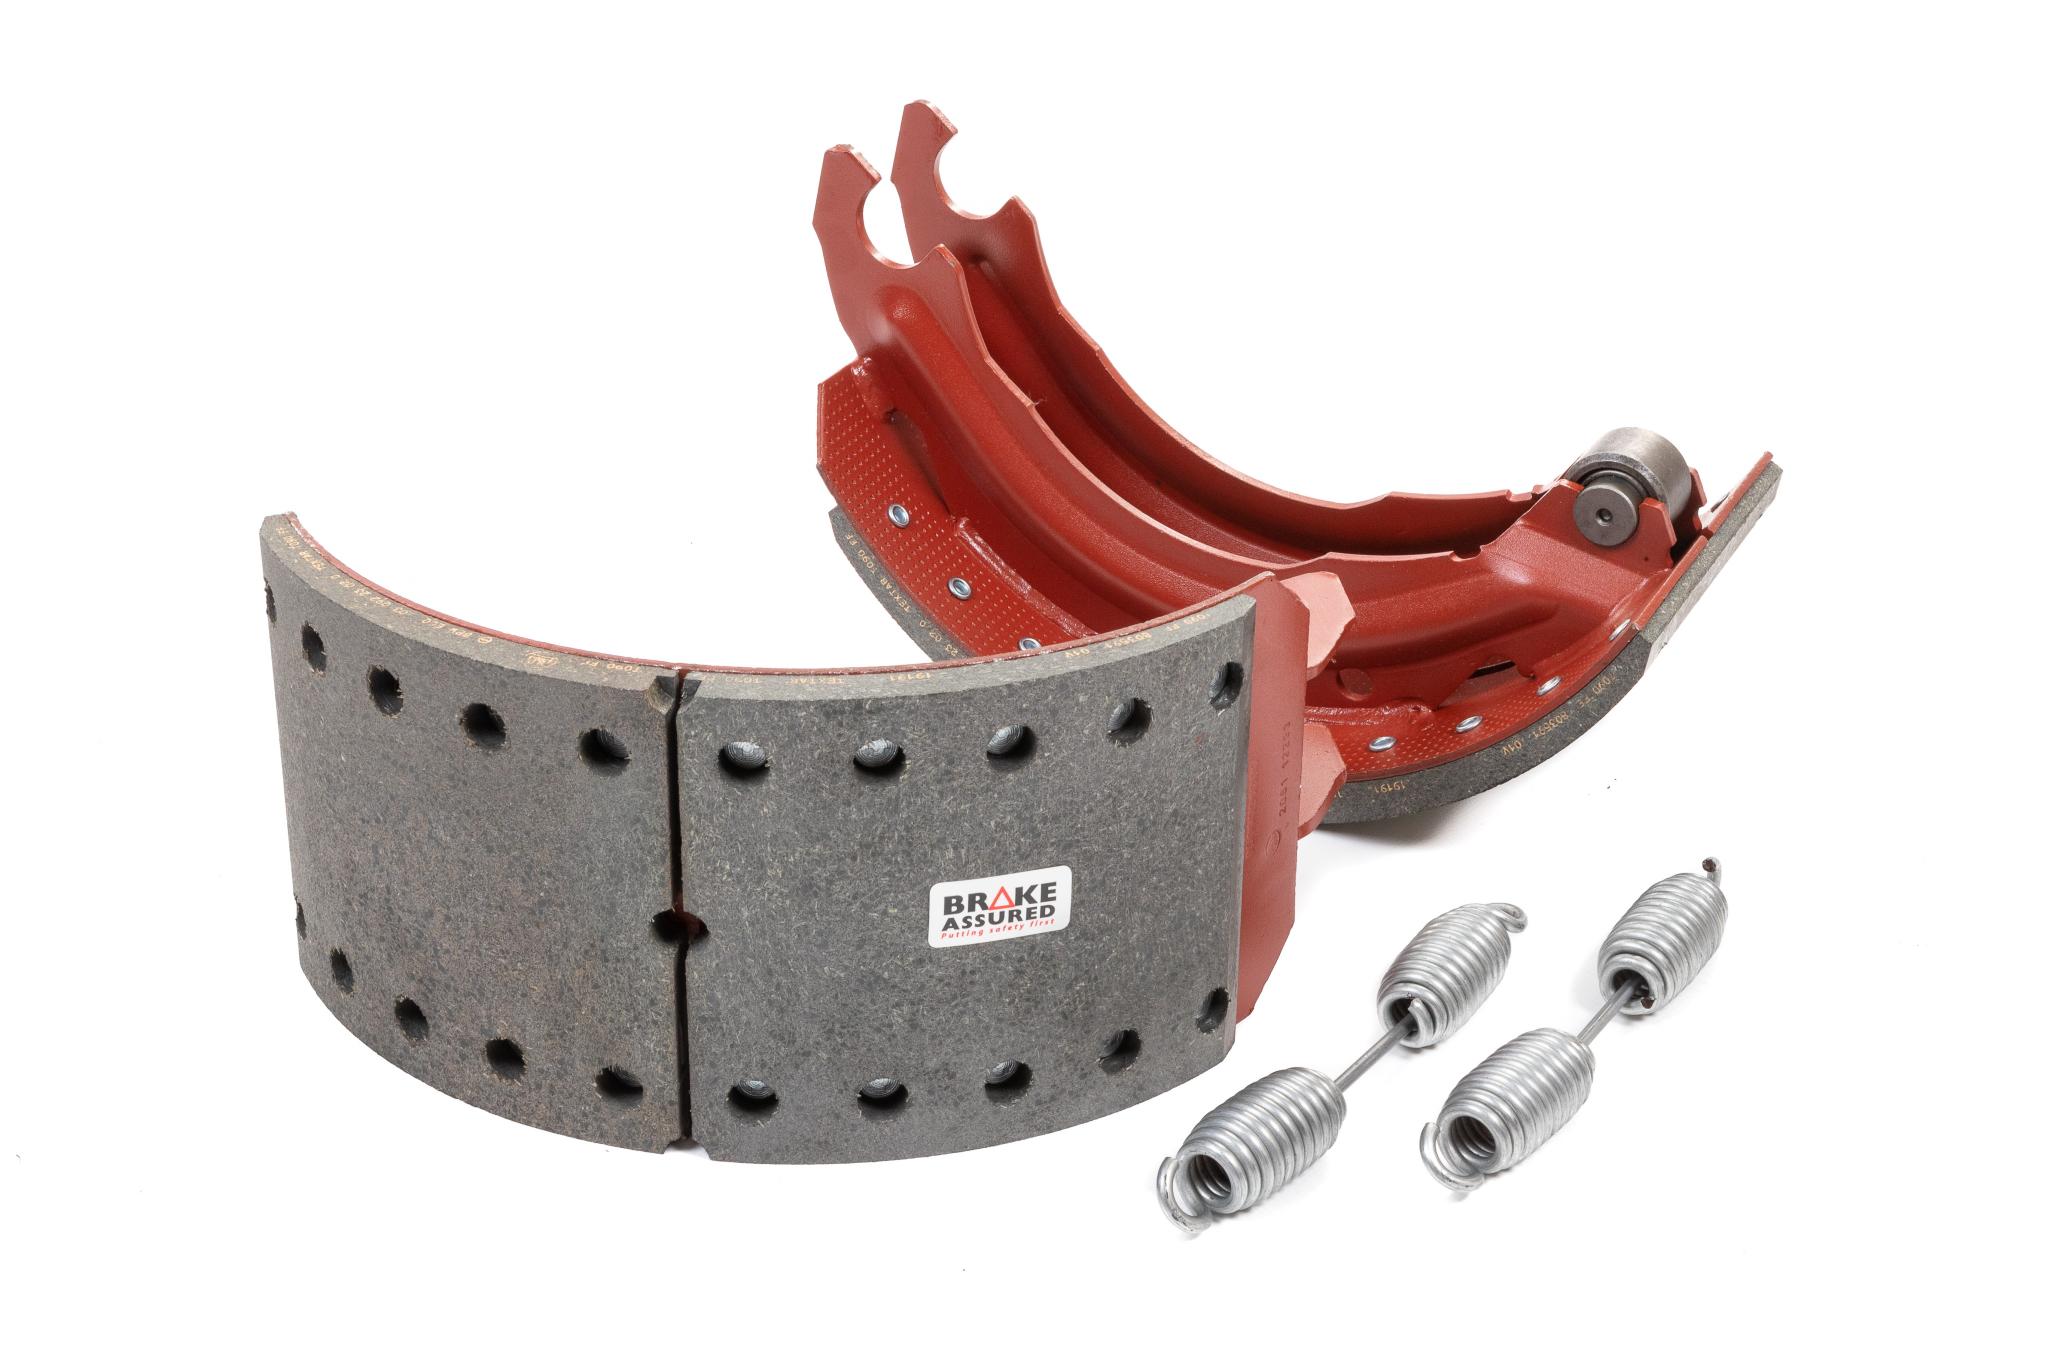 67 Back To School Brake shoe relining uk for Trend in 2021